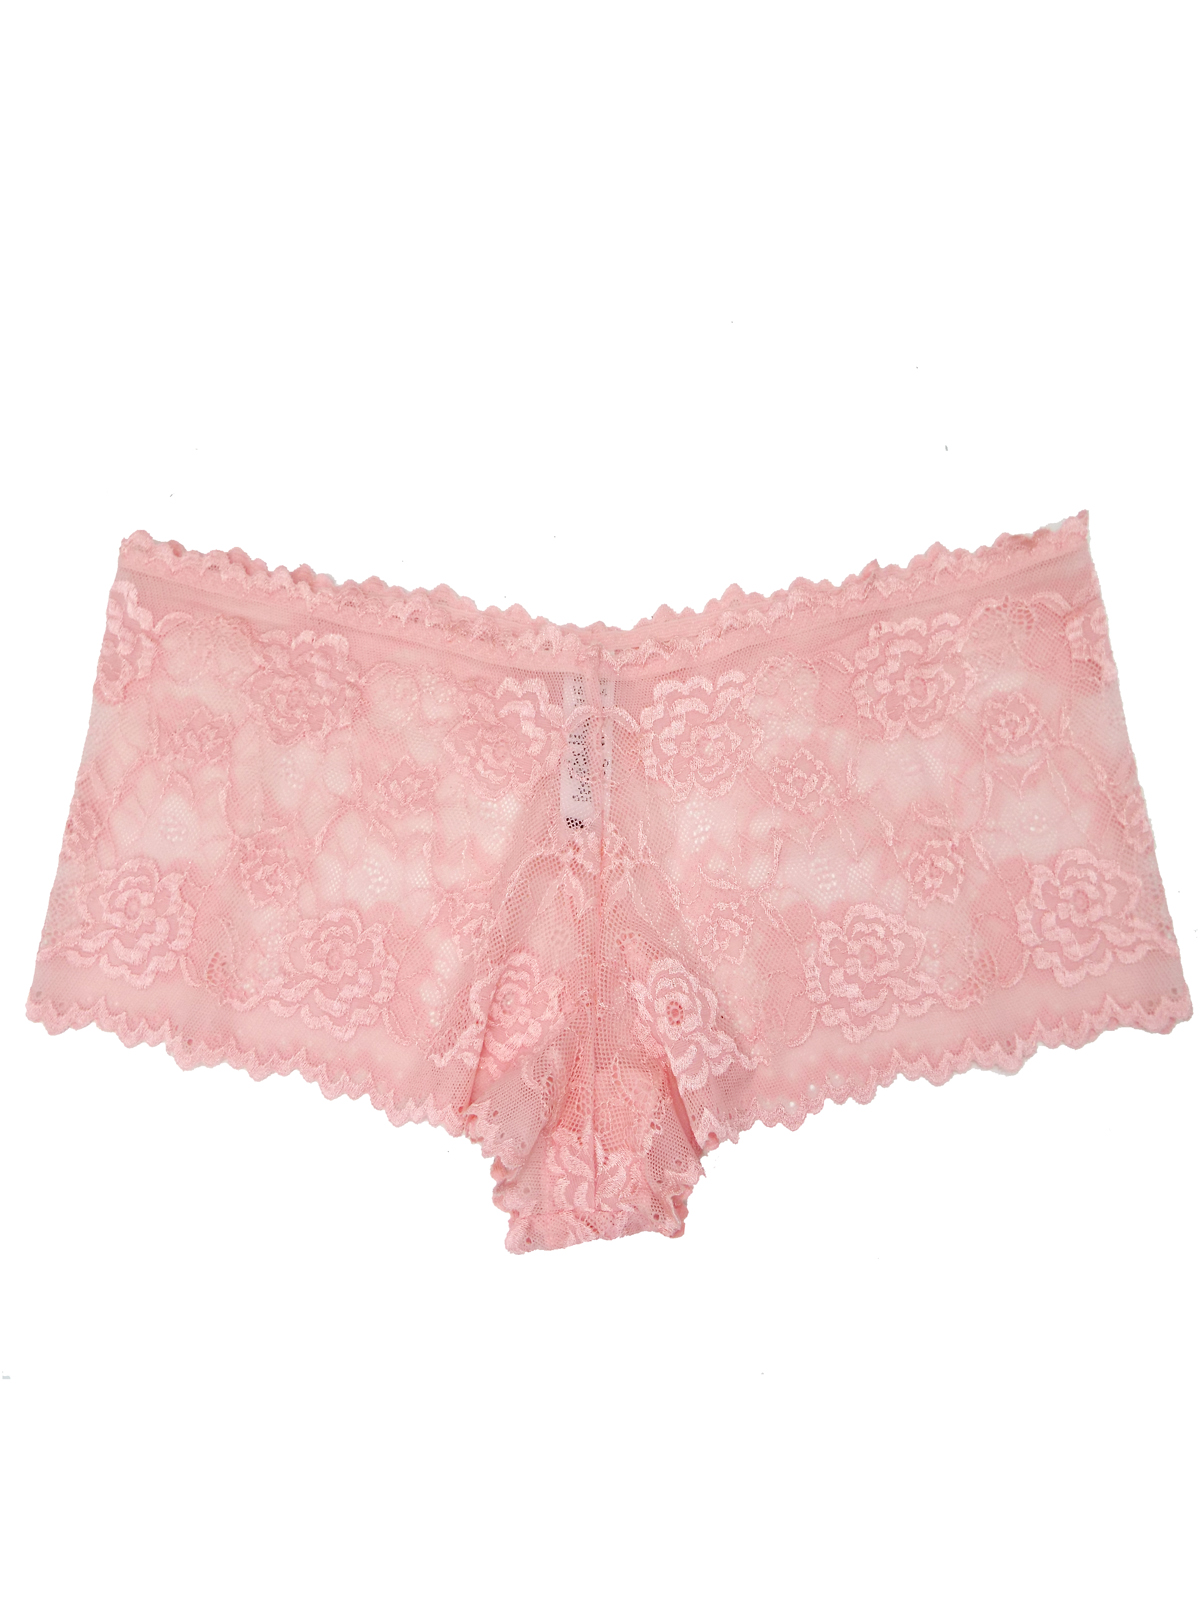 George - - PEACH Full Lace No VPL Shorts - Size 8 to 20